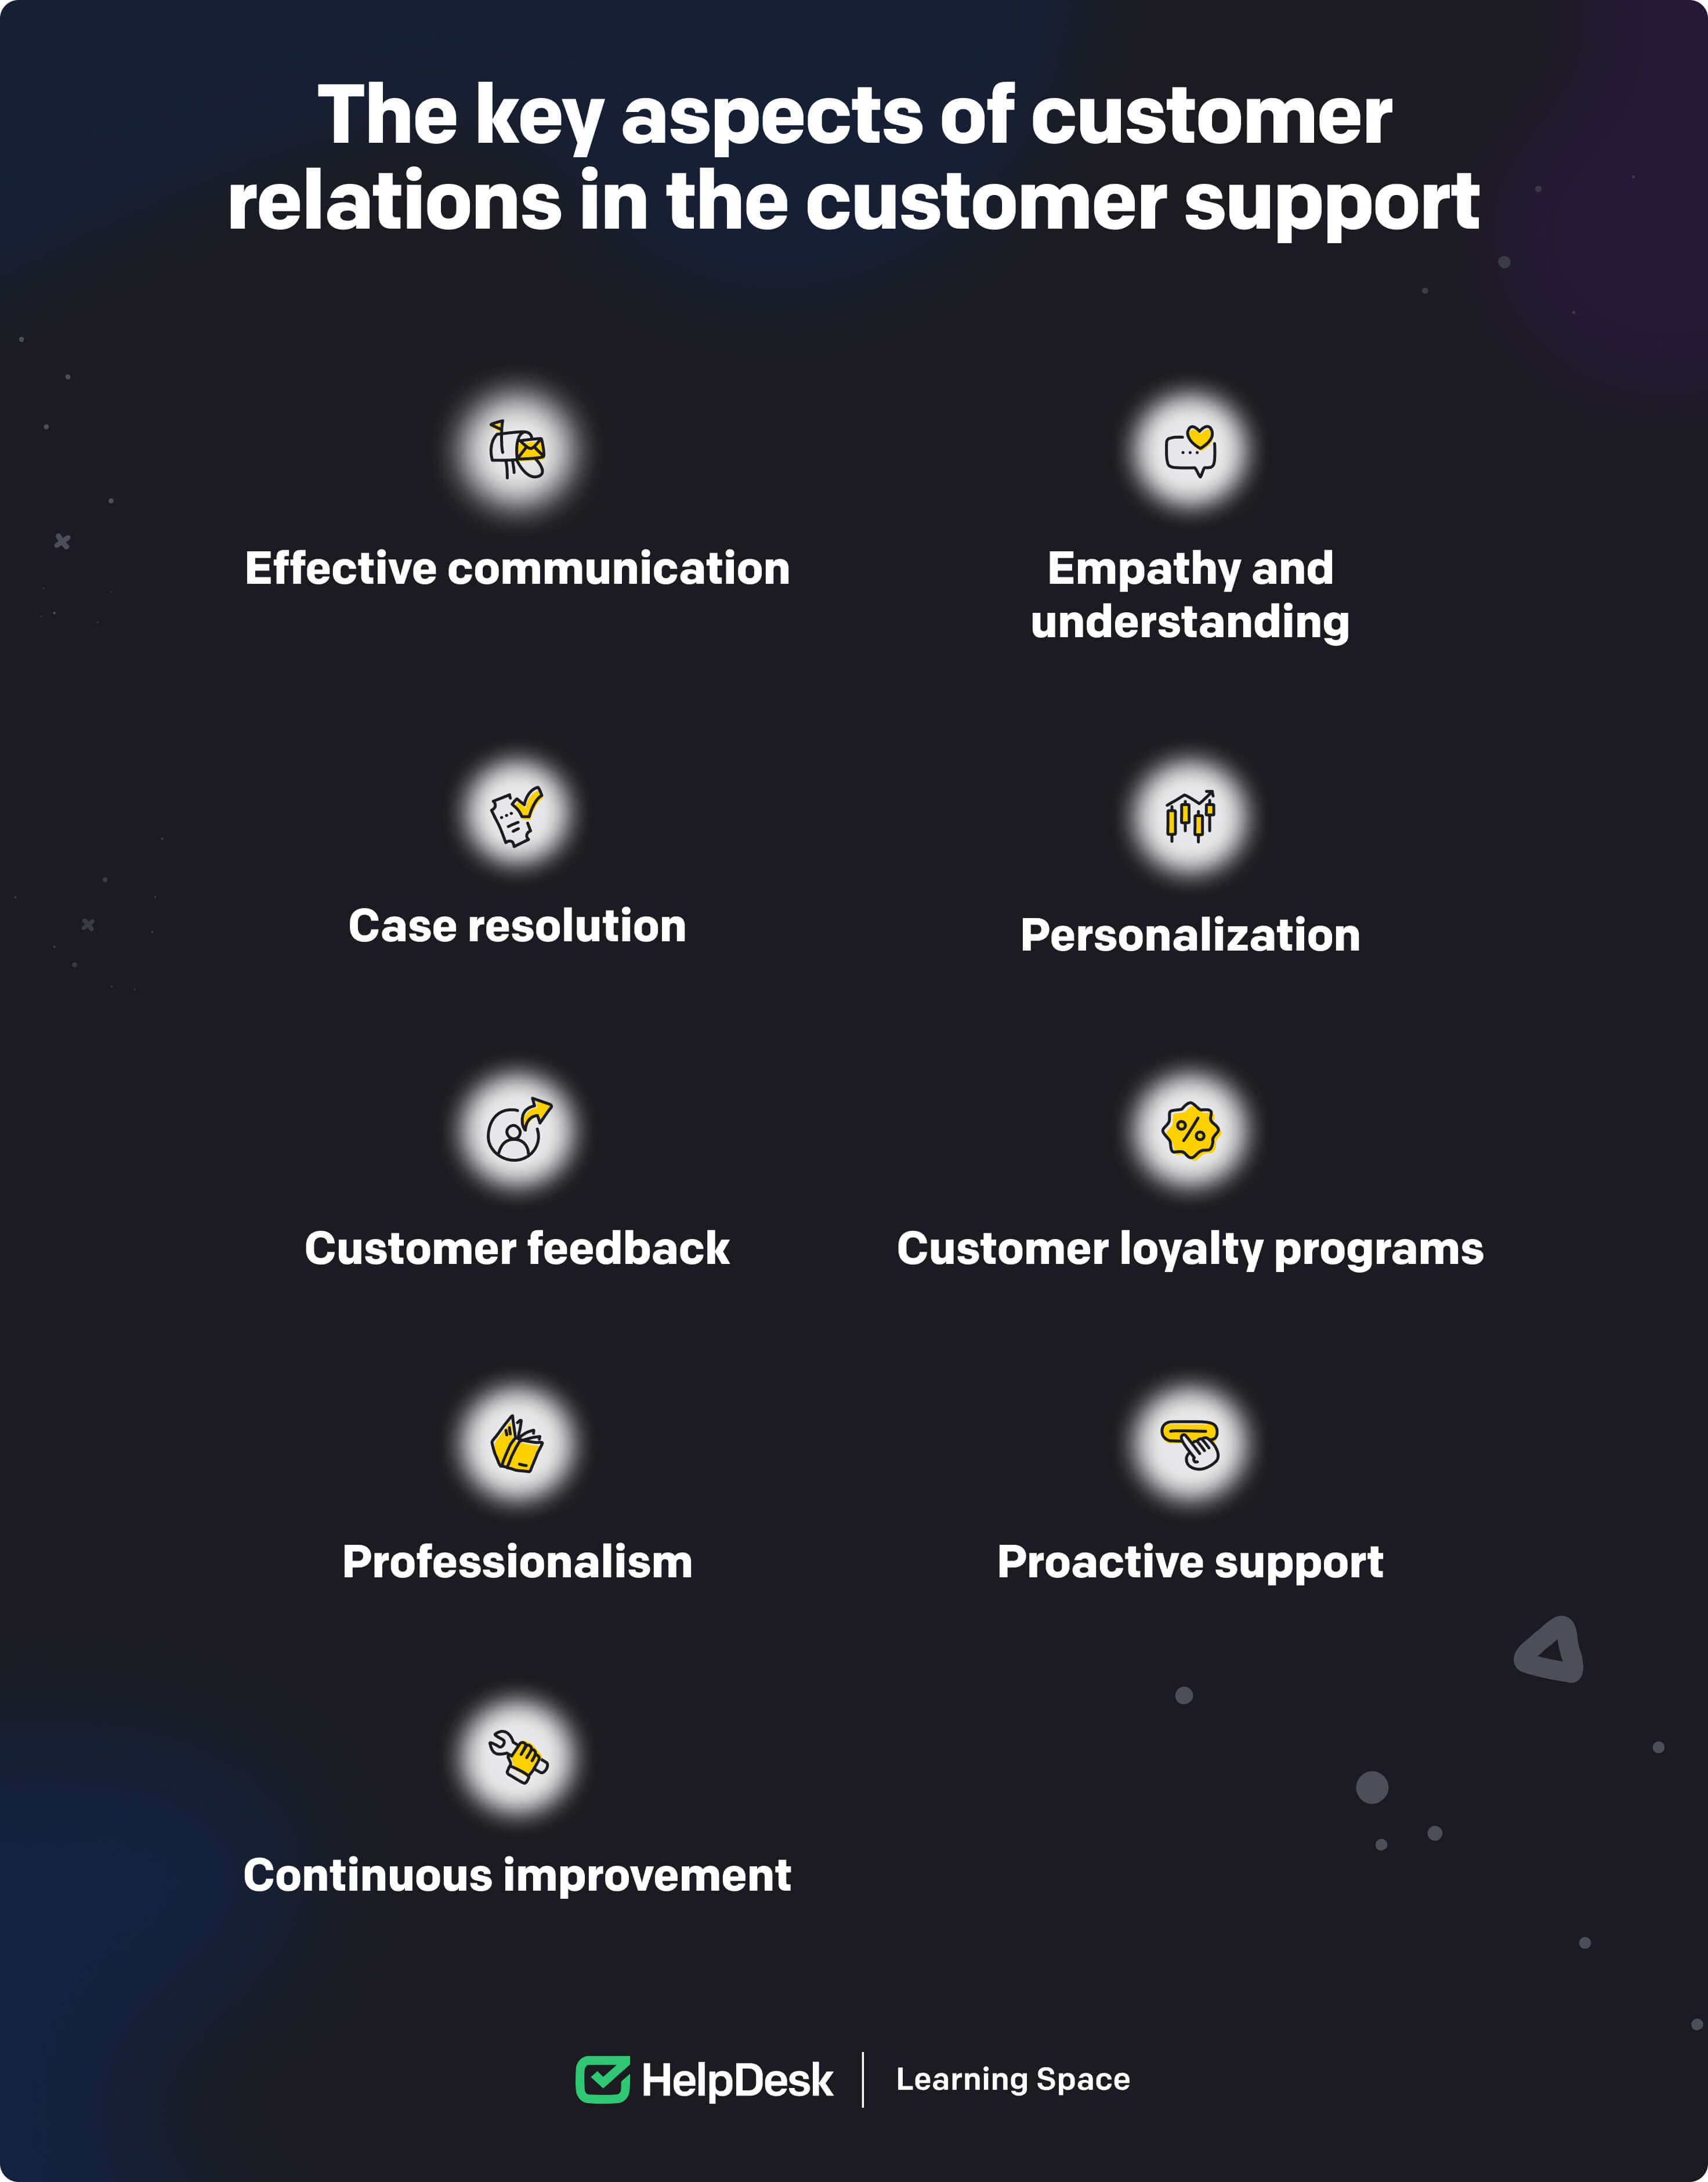 Key aspects of customer relations in customer support